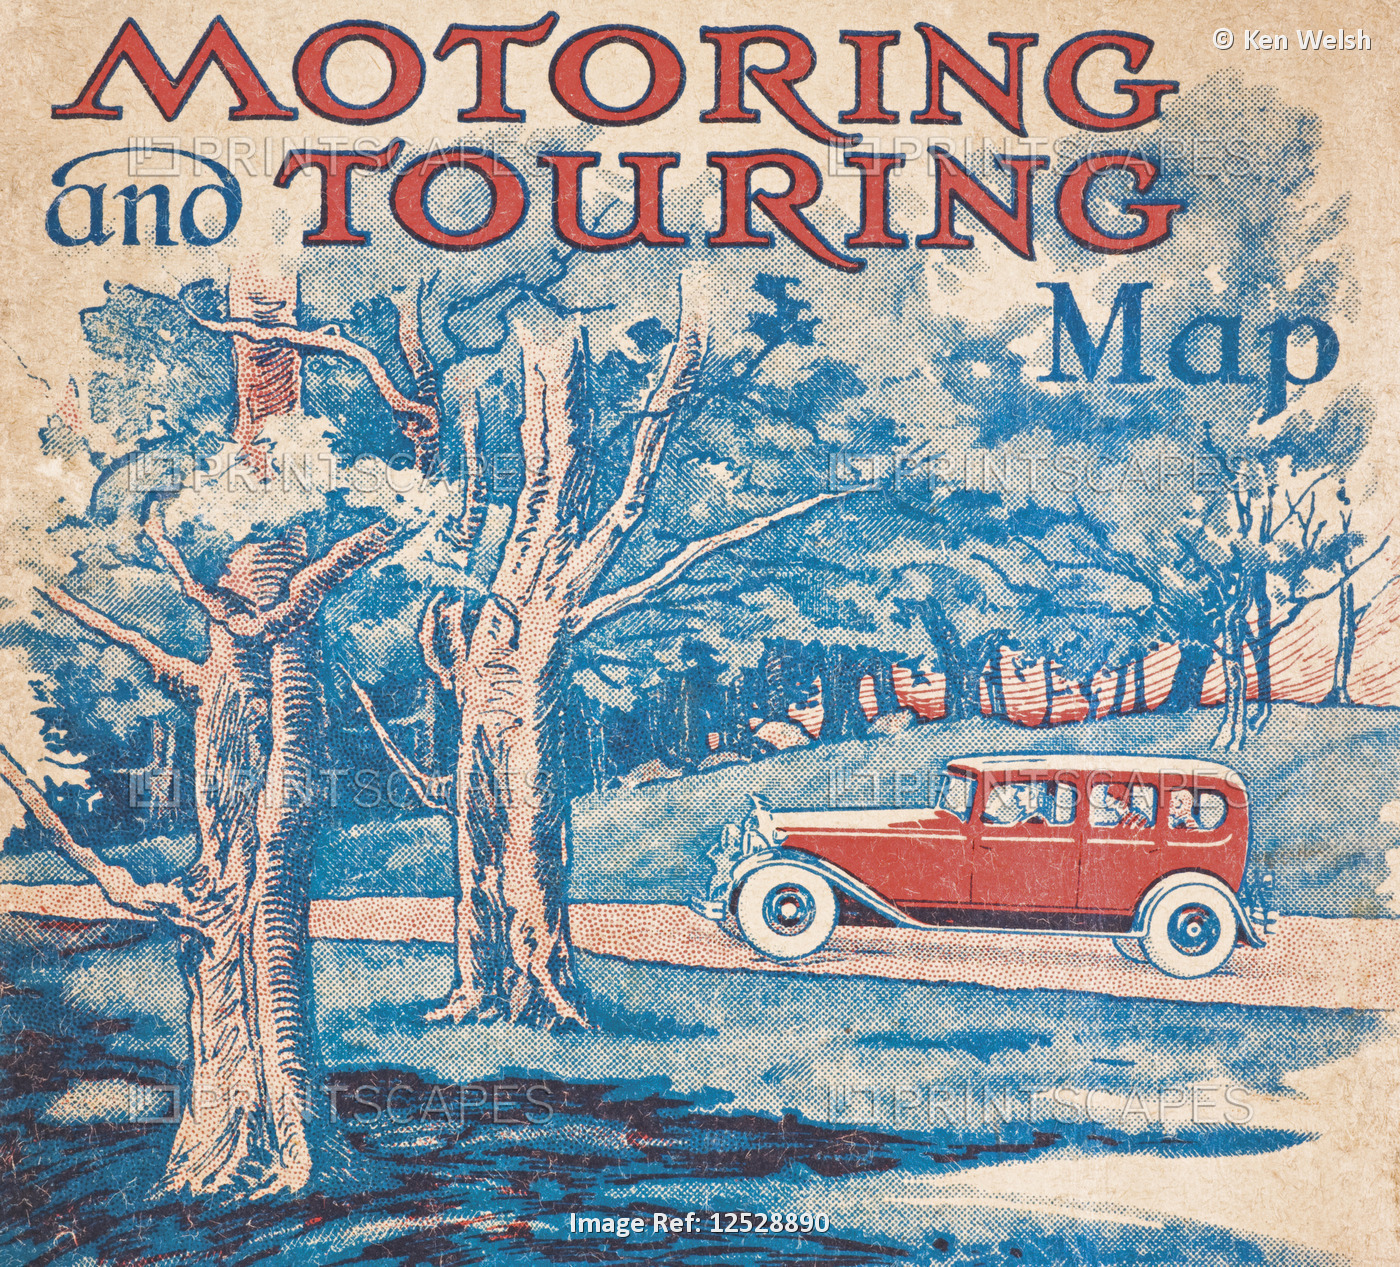 Cover of an English 1920's touring map.